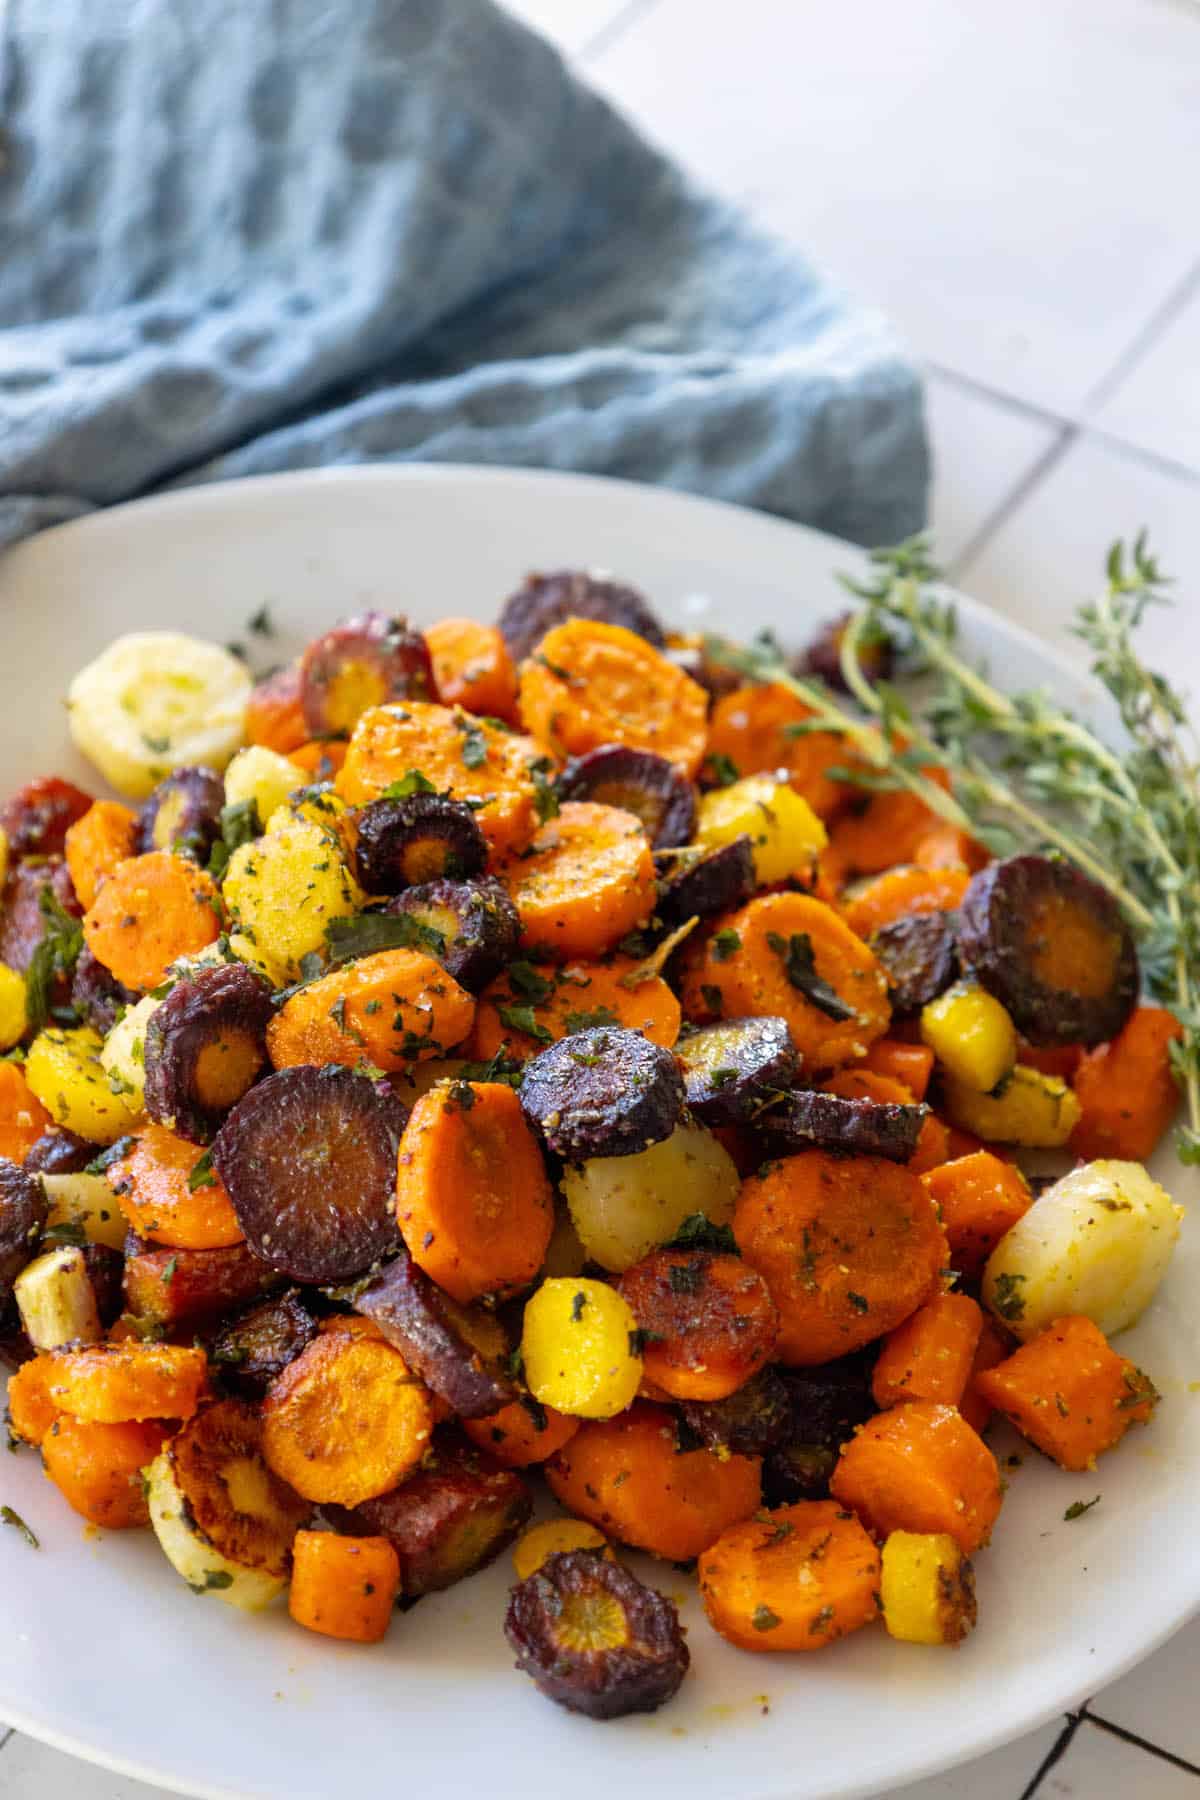 Garlic herb roasted vegetables on a white plate with sprigs of thyme.